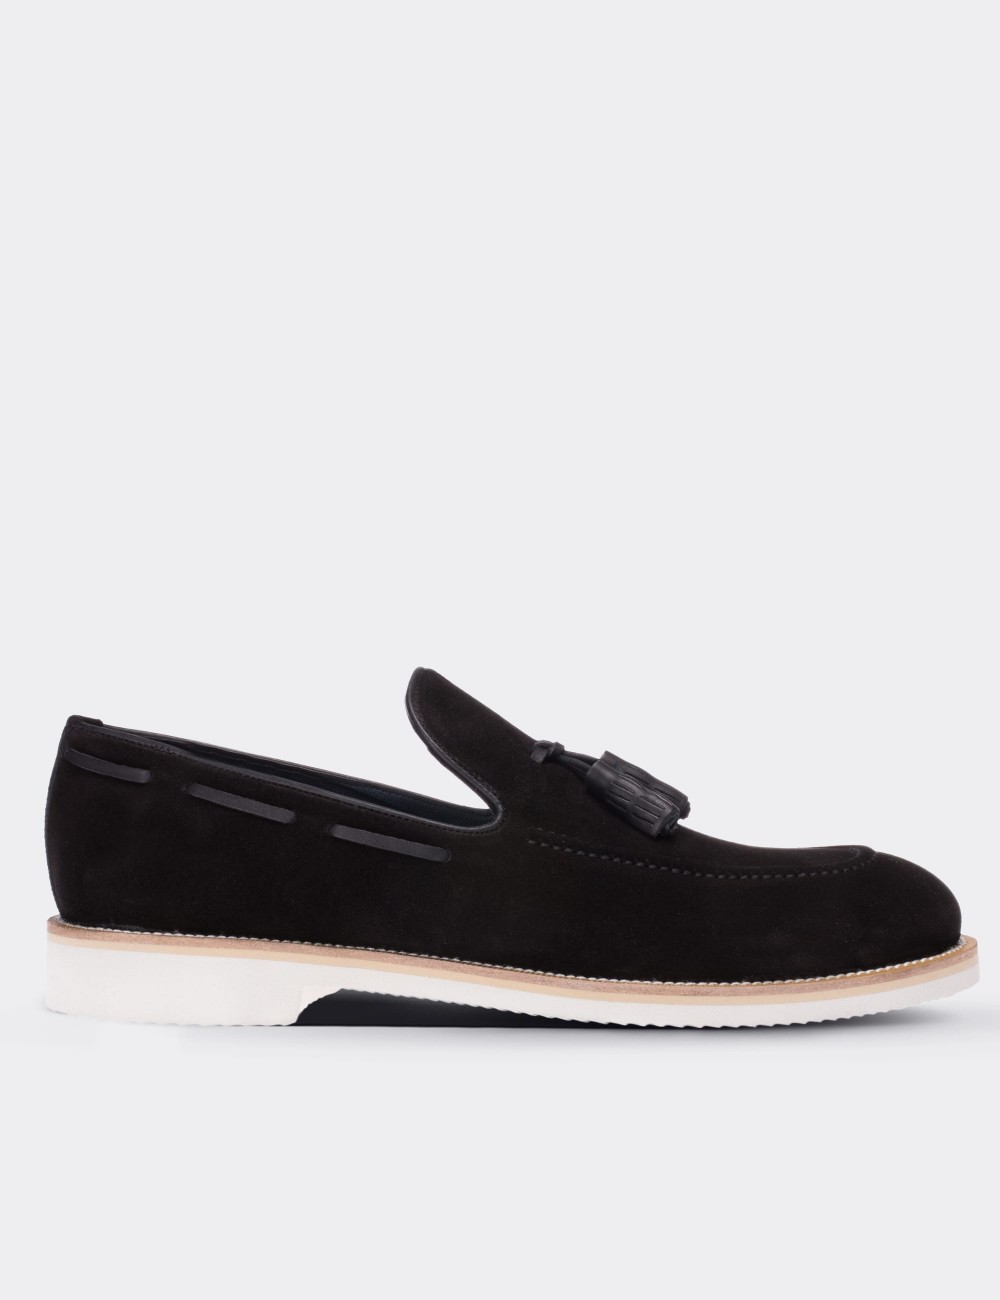 Black Suede Leather Loafers - 01319MSYHE02